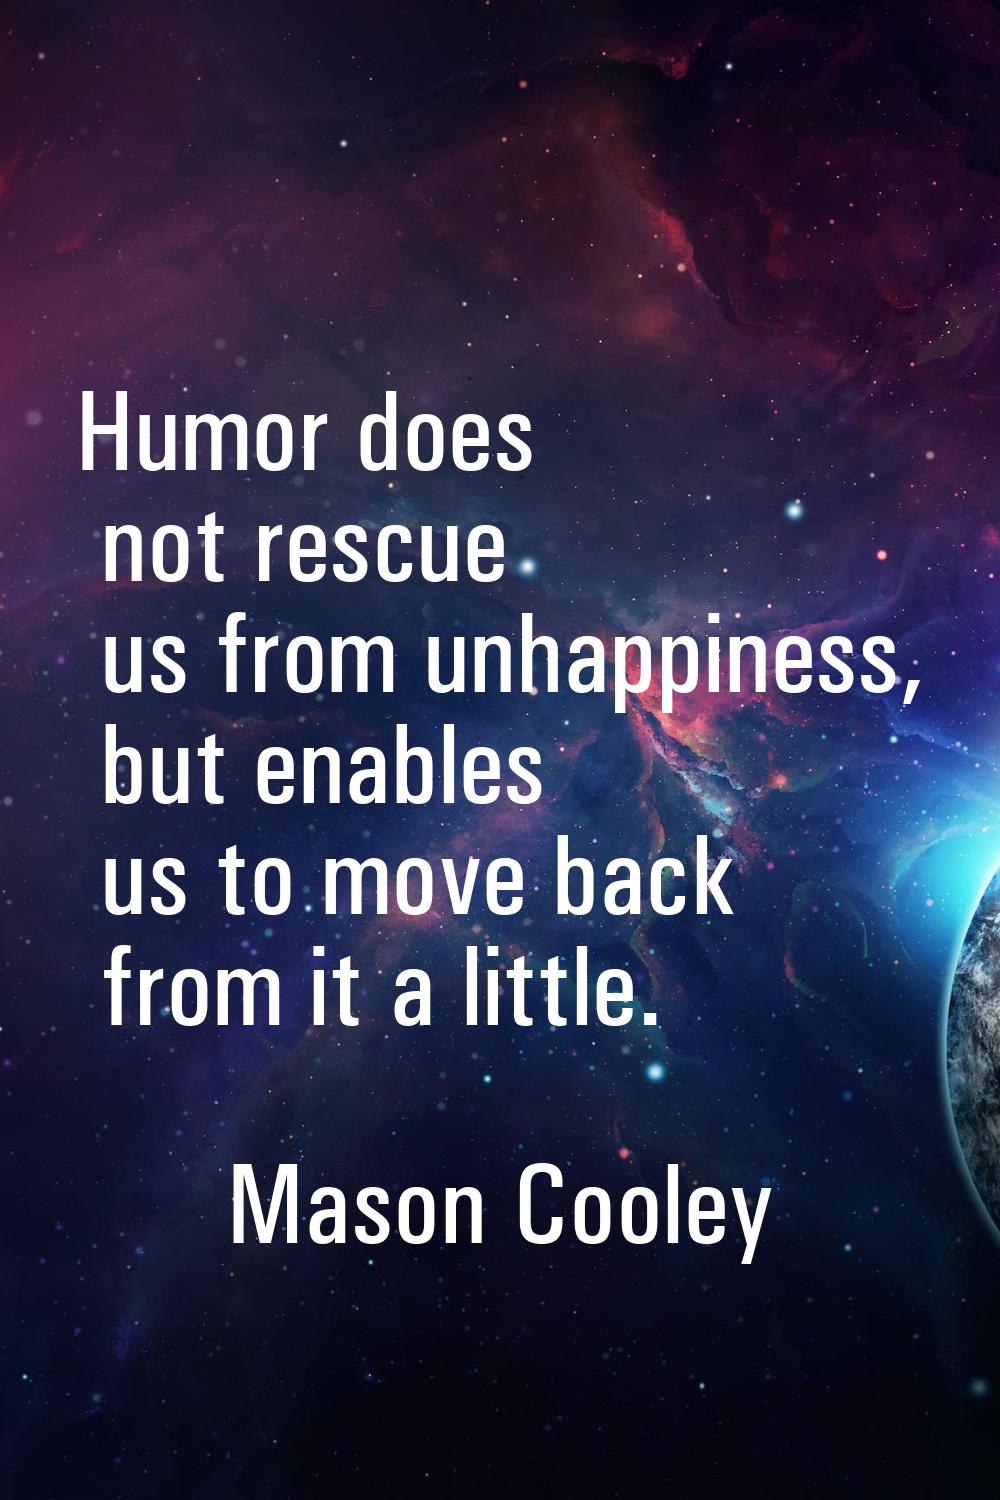 Humor does not rescue us from unhappiness, but enables us to move back from it a little.